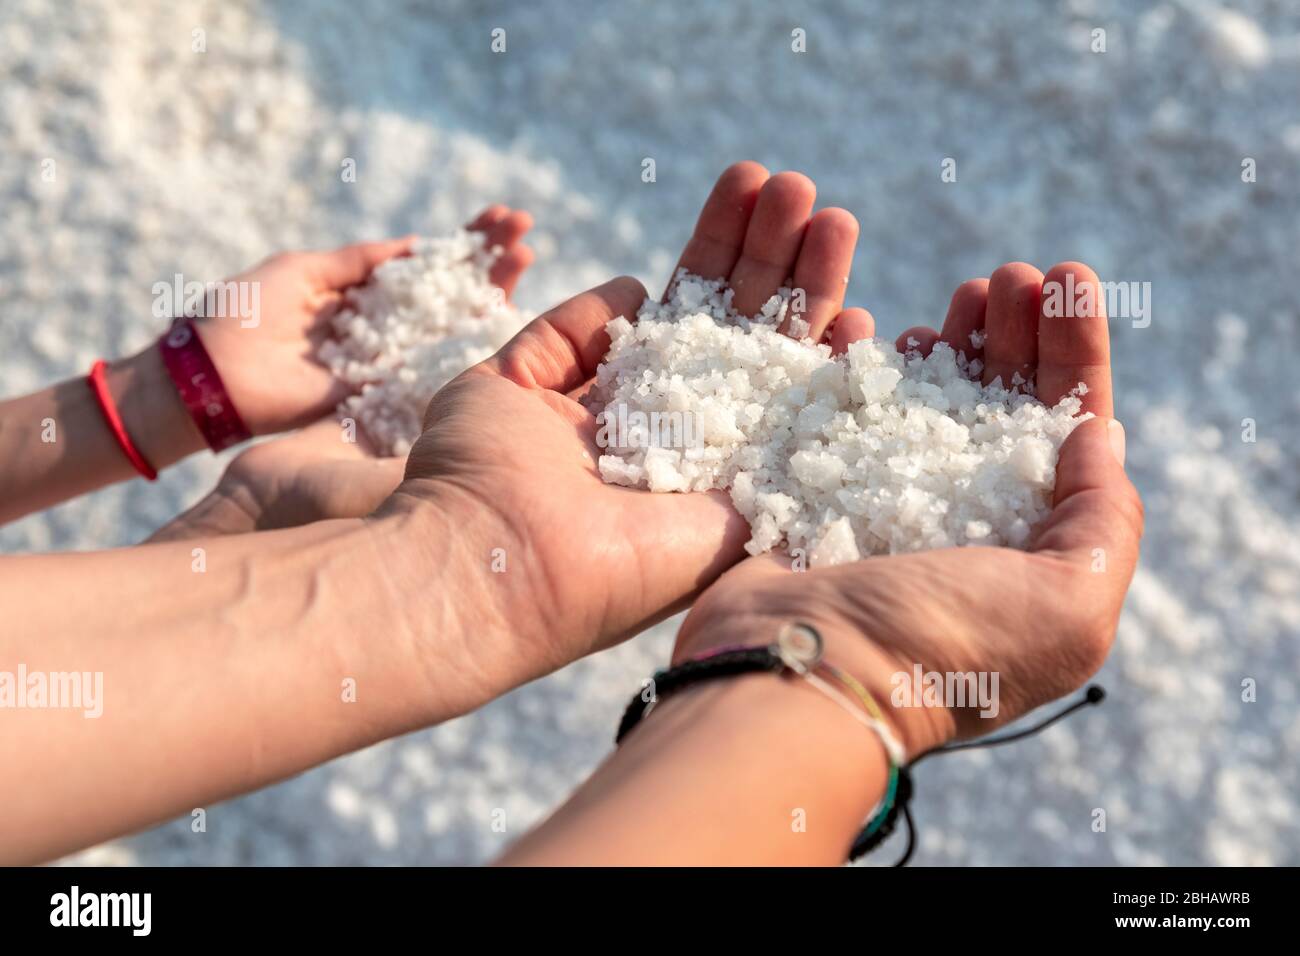 salt collected in the hands, the finished product of the nin salt pans, Nin, Dalmatia, Zadar country, Croatia Stock Photo